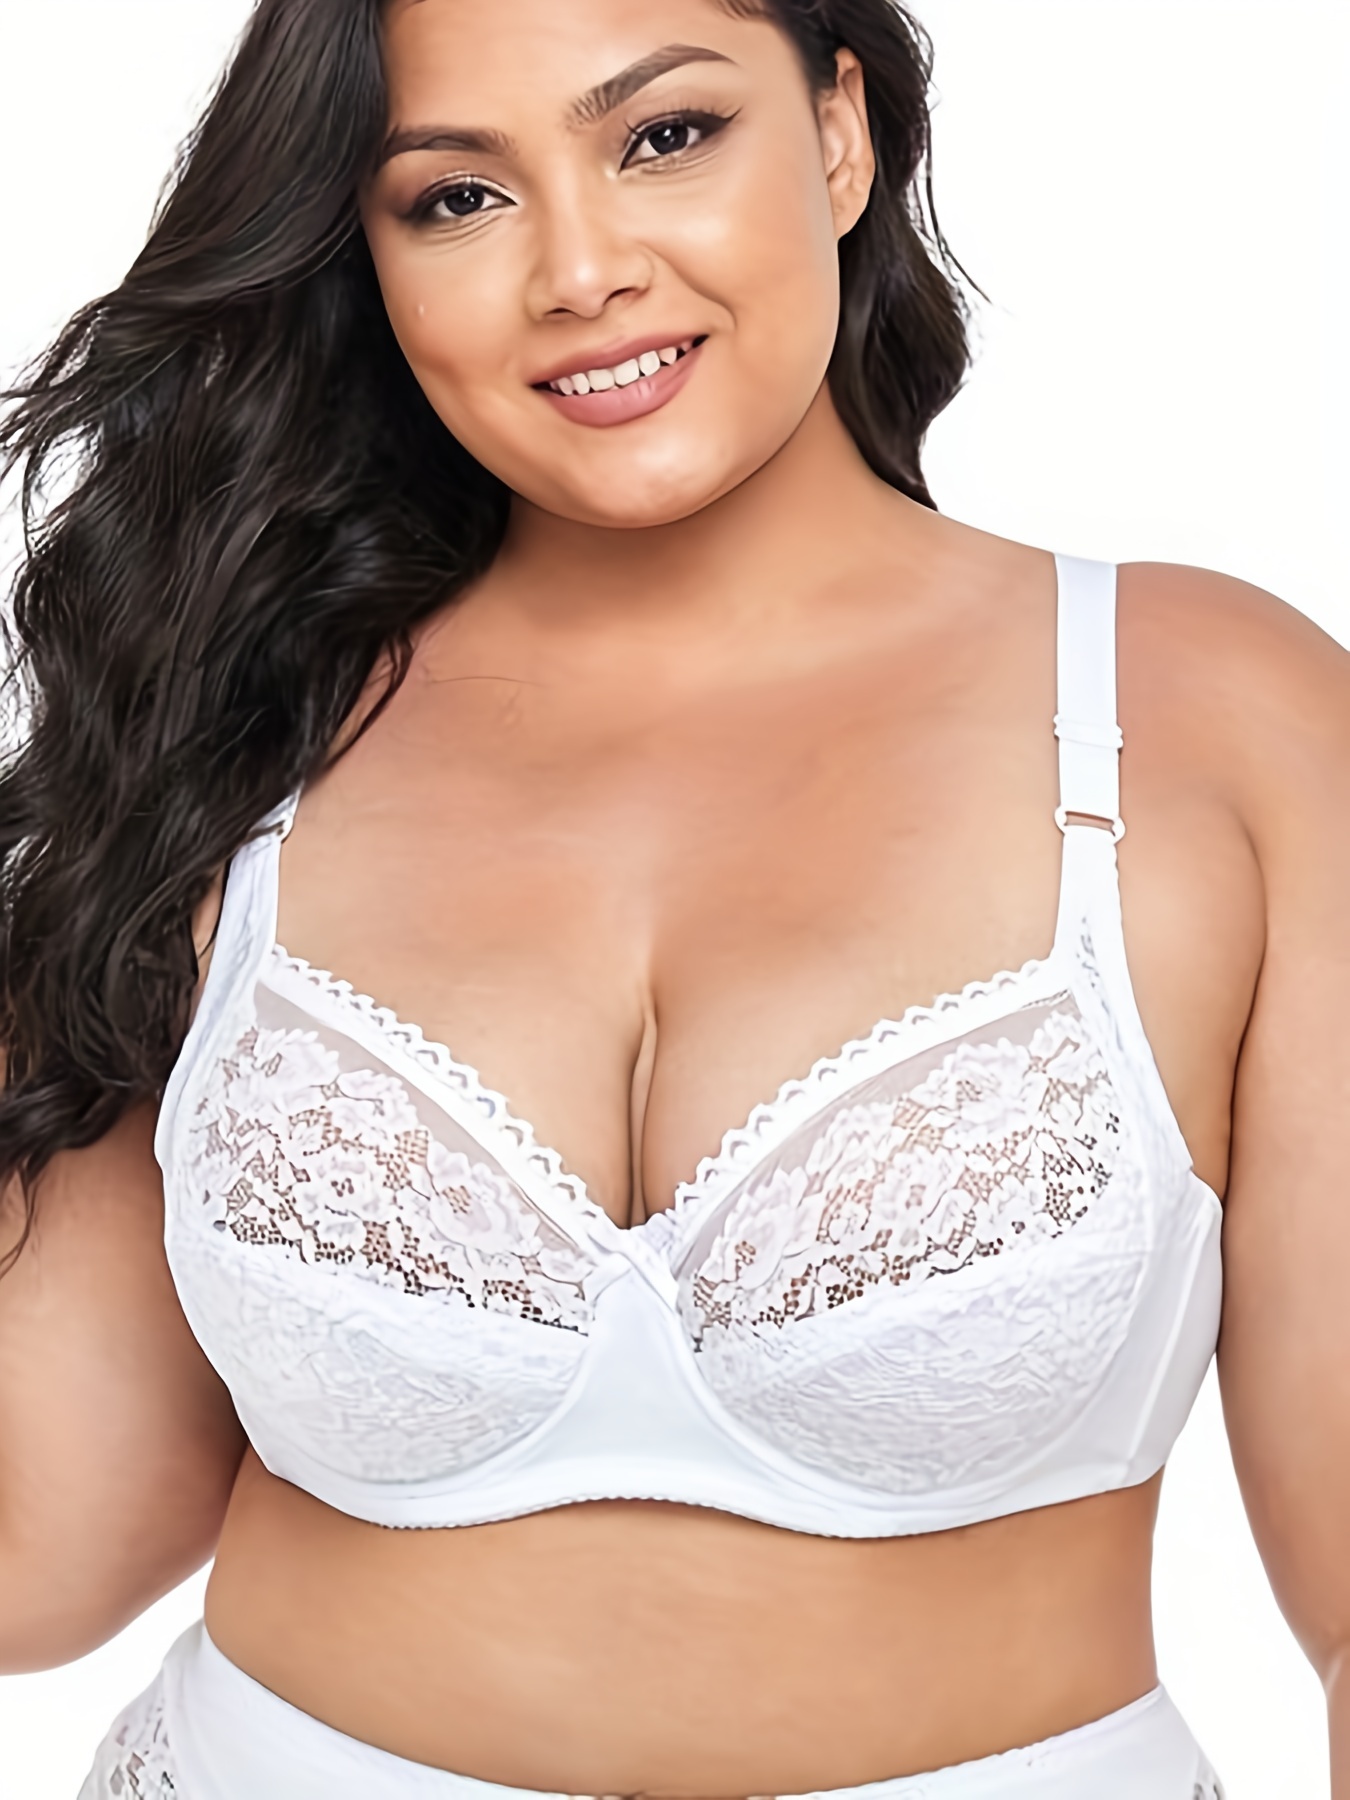 Plus Size Bra Ladies Bras Lace Sheer Sexy Lingerie Extreme